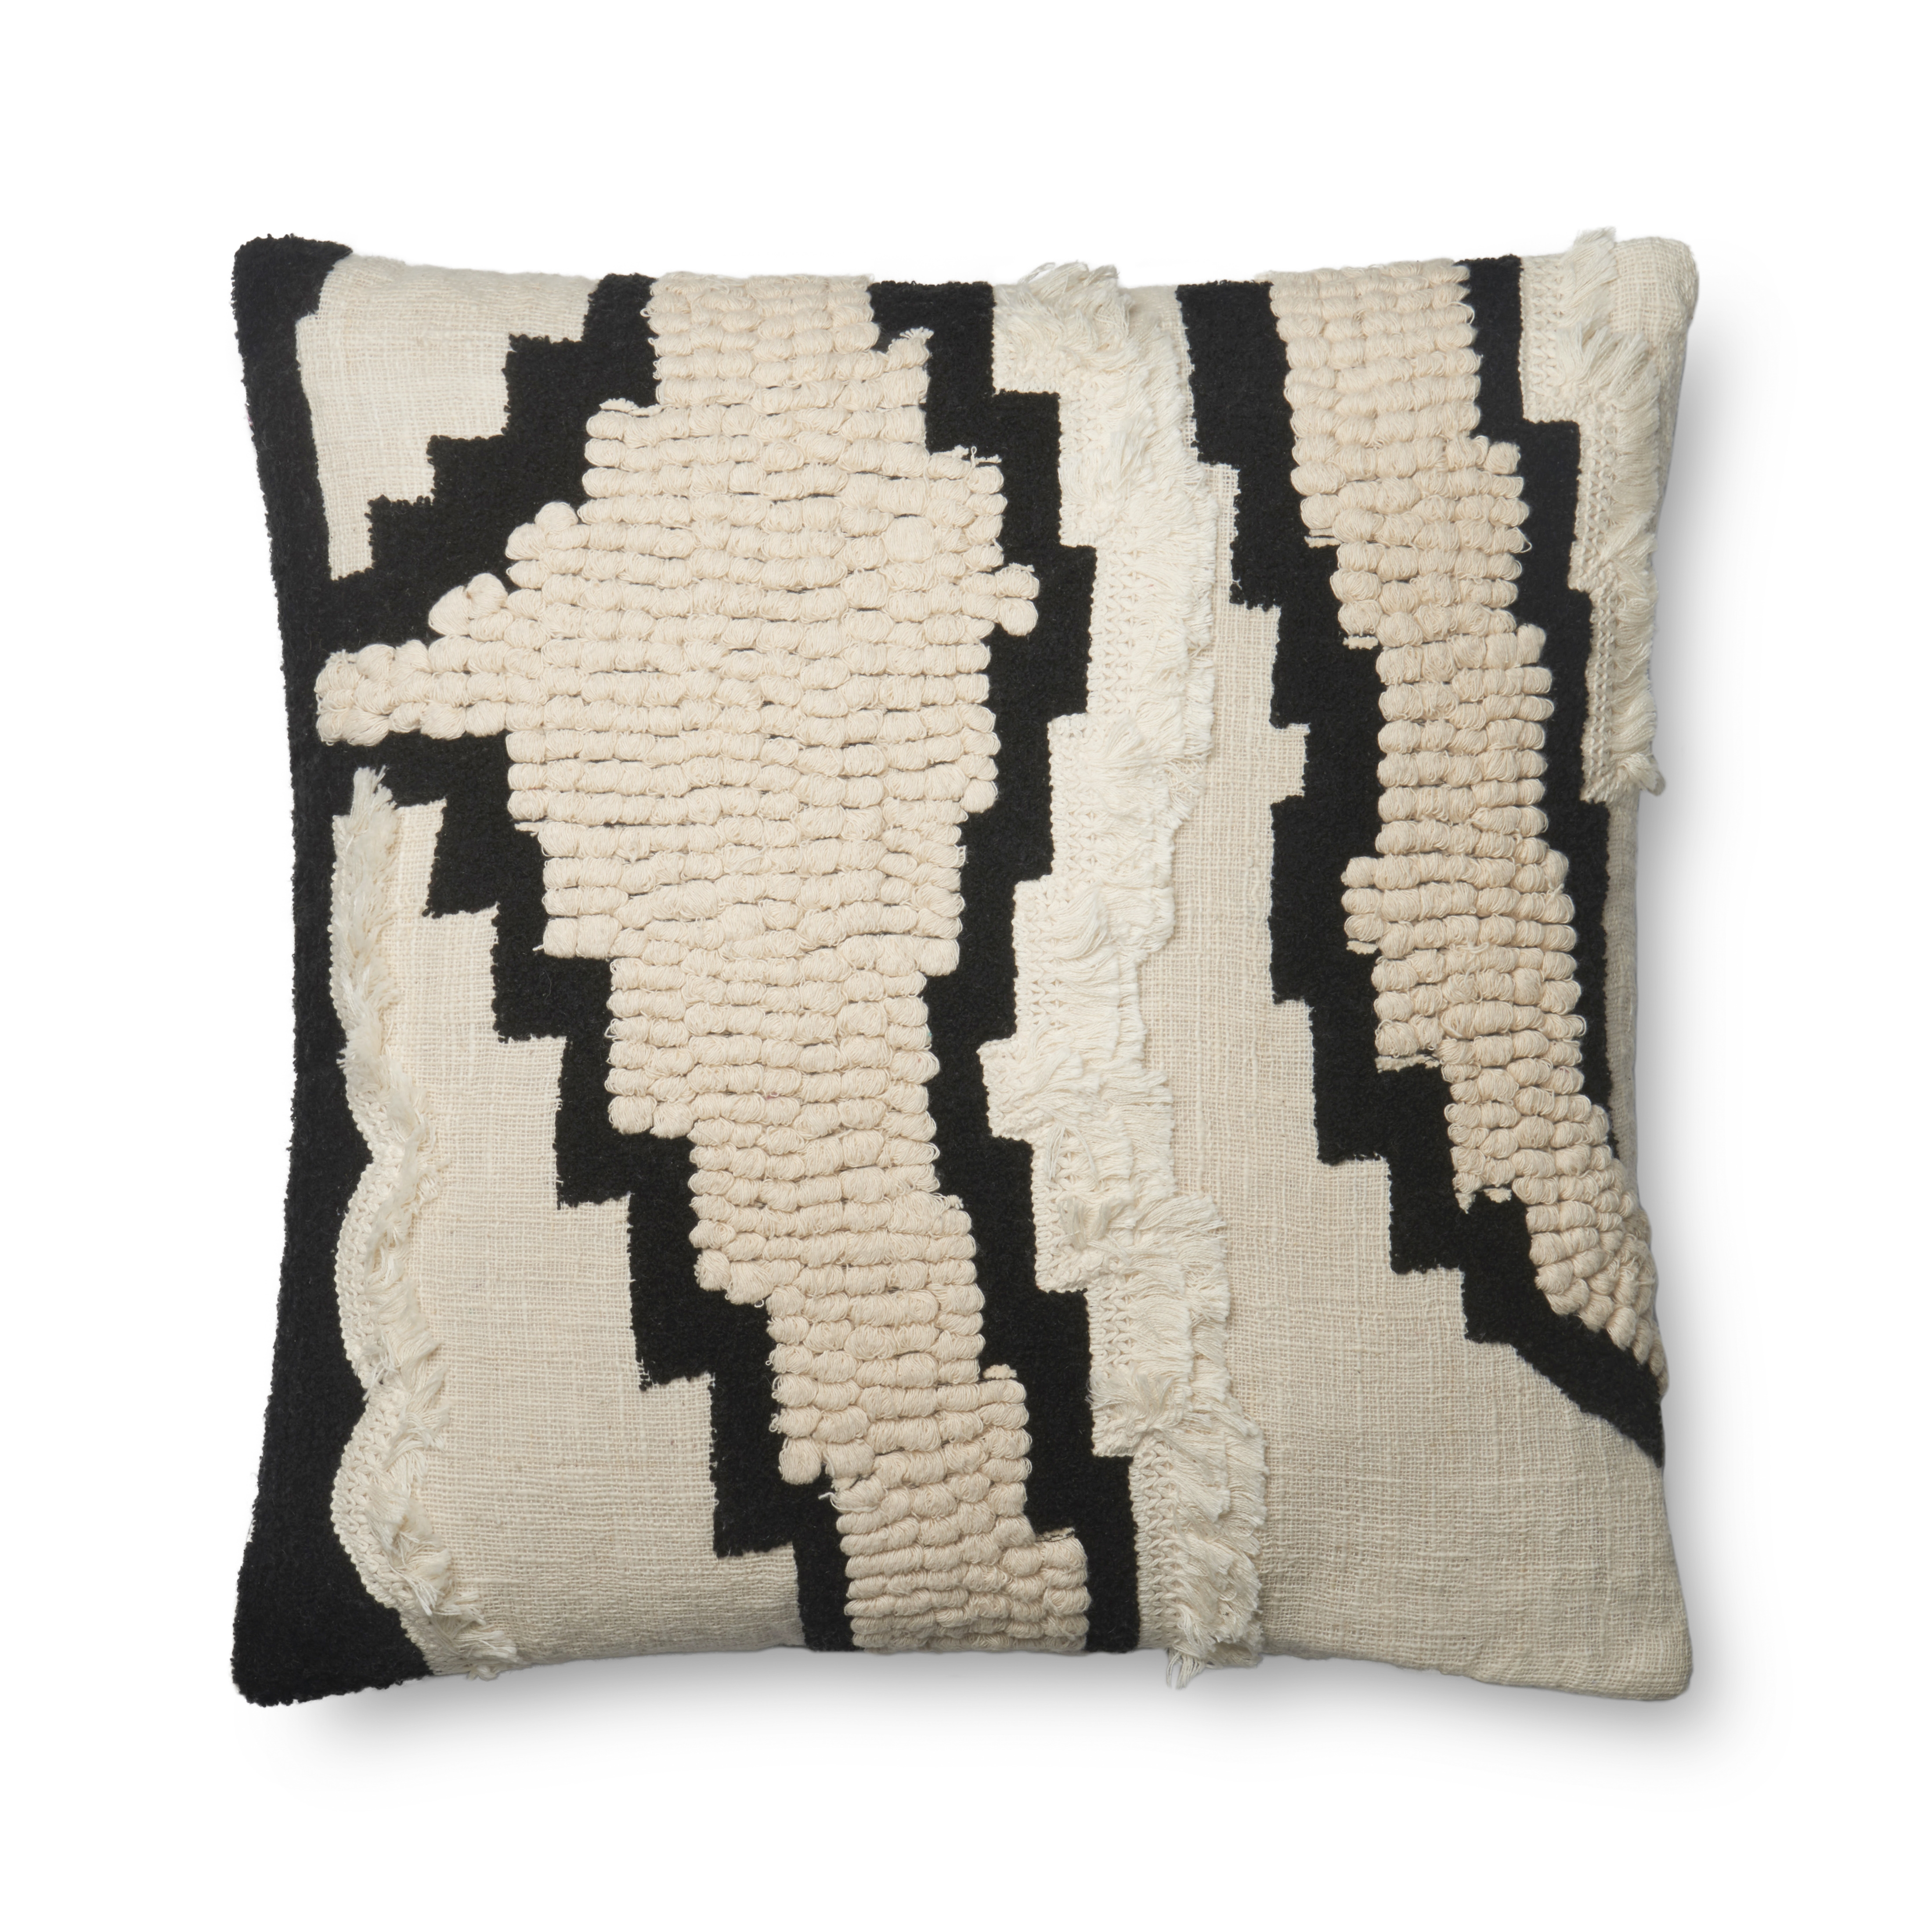 Magnolia Home by Joanna Gaines PILLOWS P1068 NATURAL / BLACK 12" x 27" Cover Only - Image 1